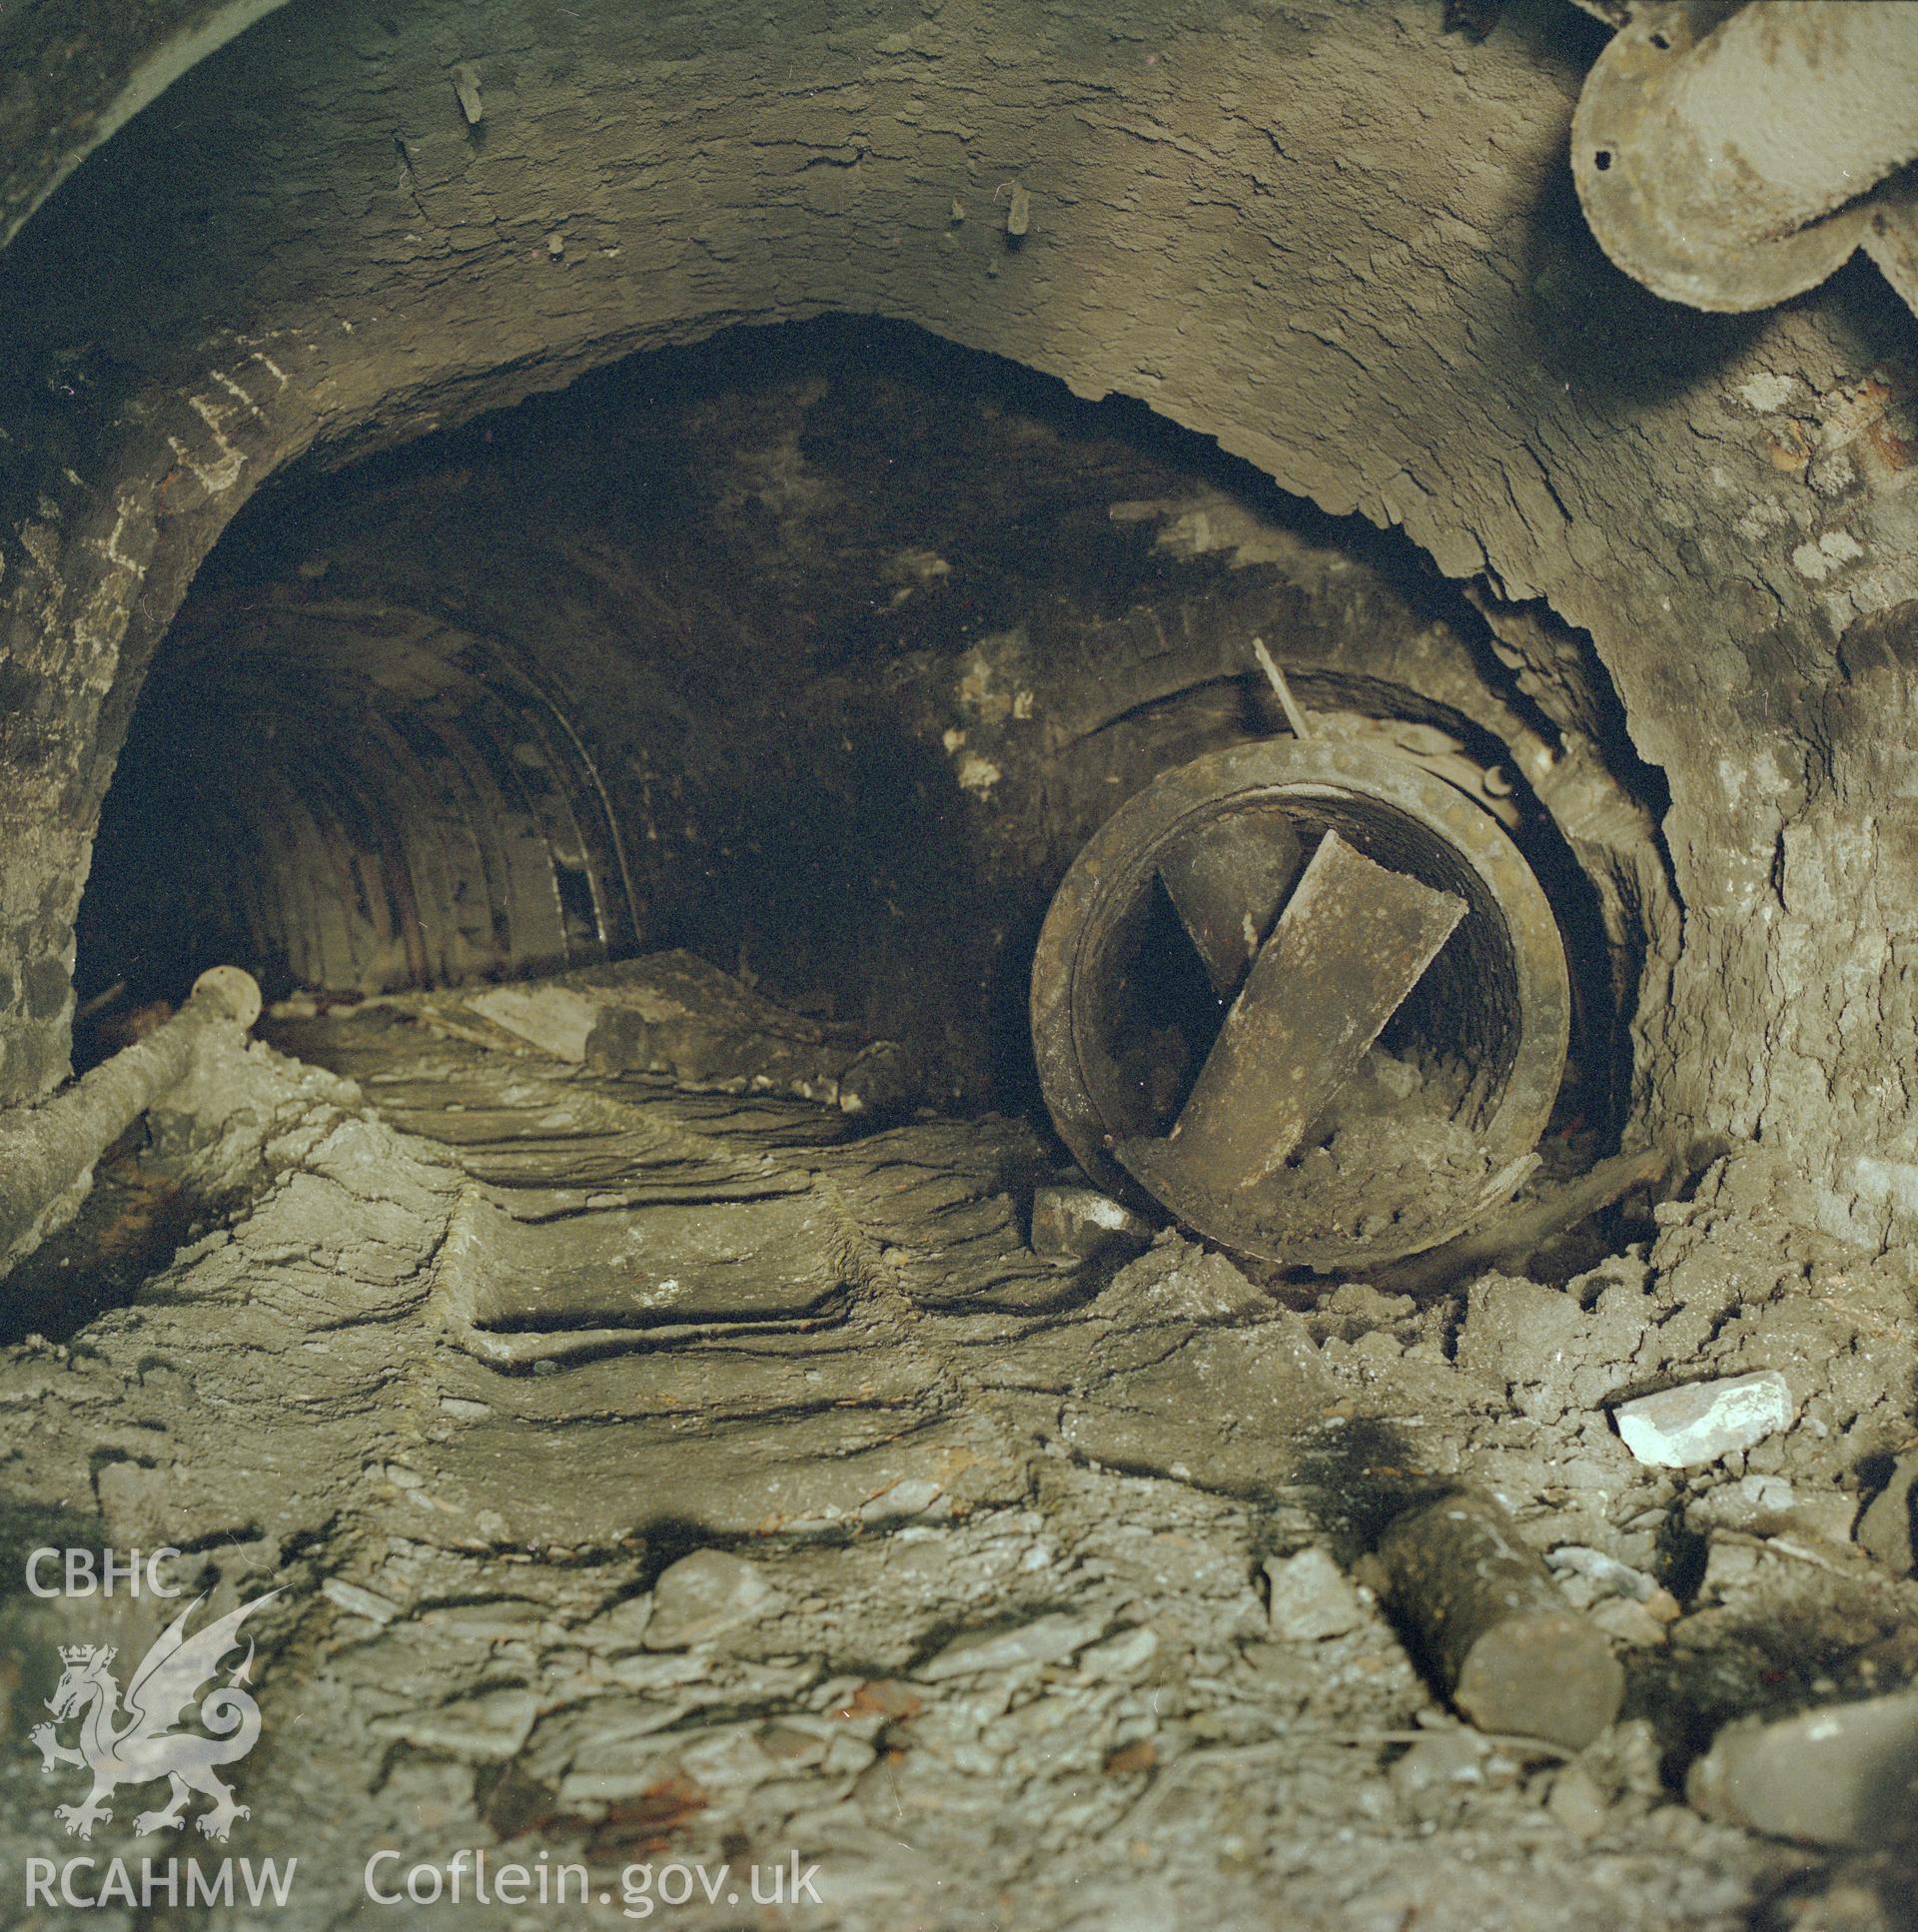 Digital copy of an acetate negative showing remains of an old boiler at Big Pit, from the John Cornwell Collection.